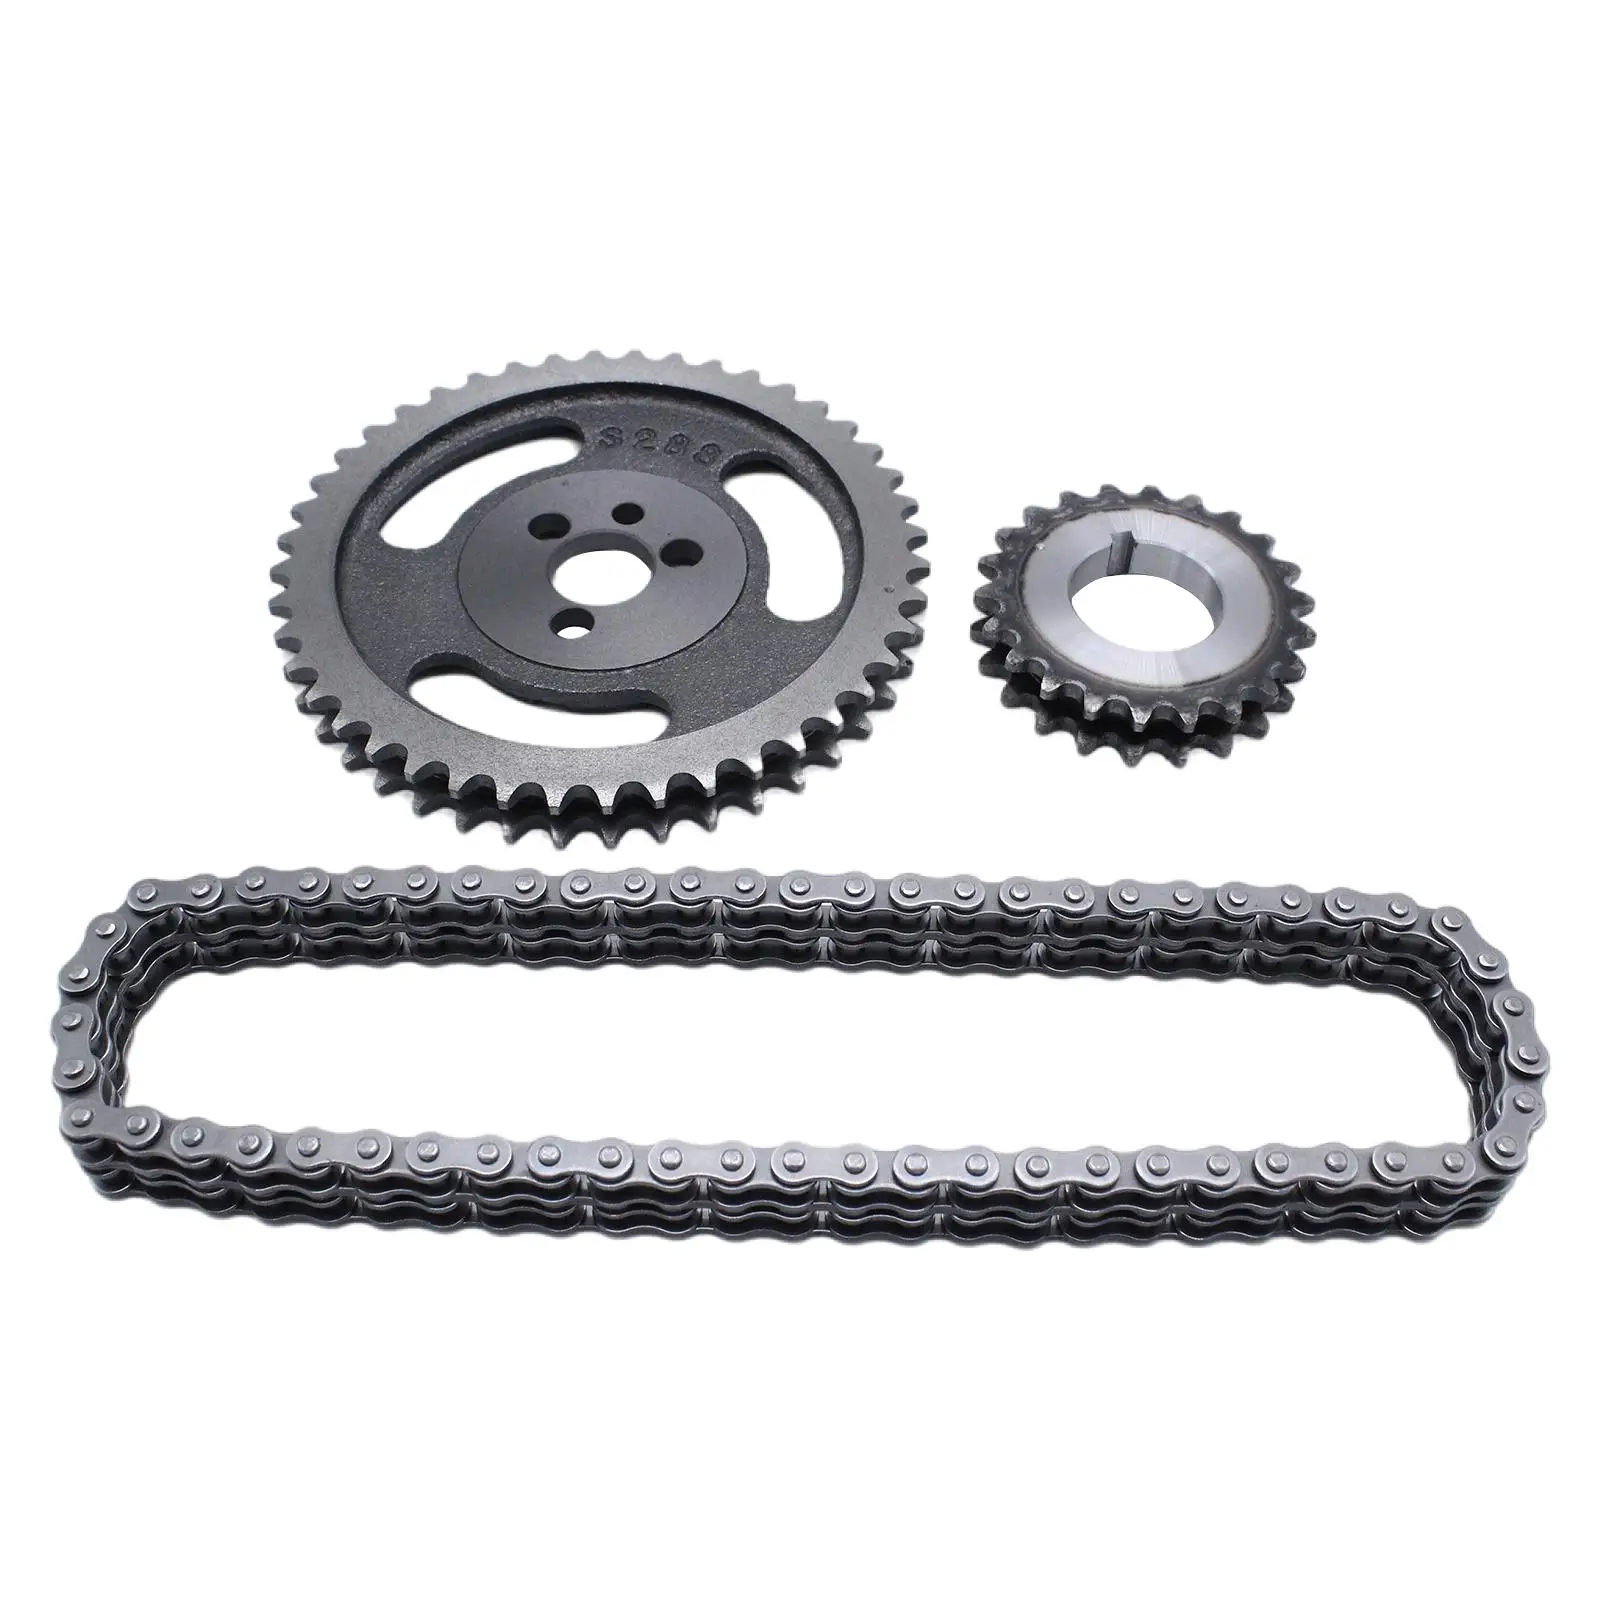 Double Roller Timing Chain Set TS163 Fits for Sbc 5.7L 383 327